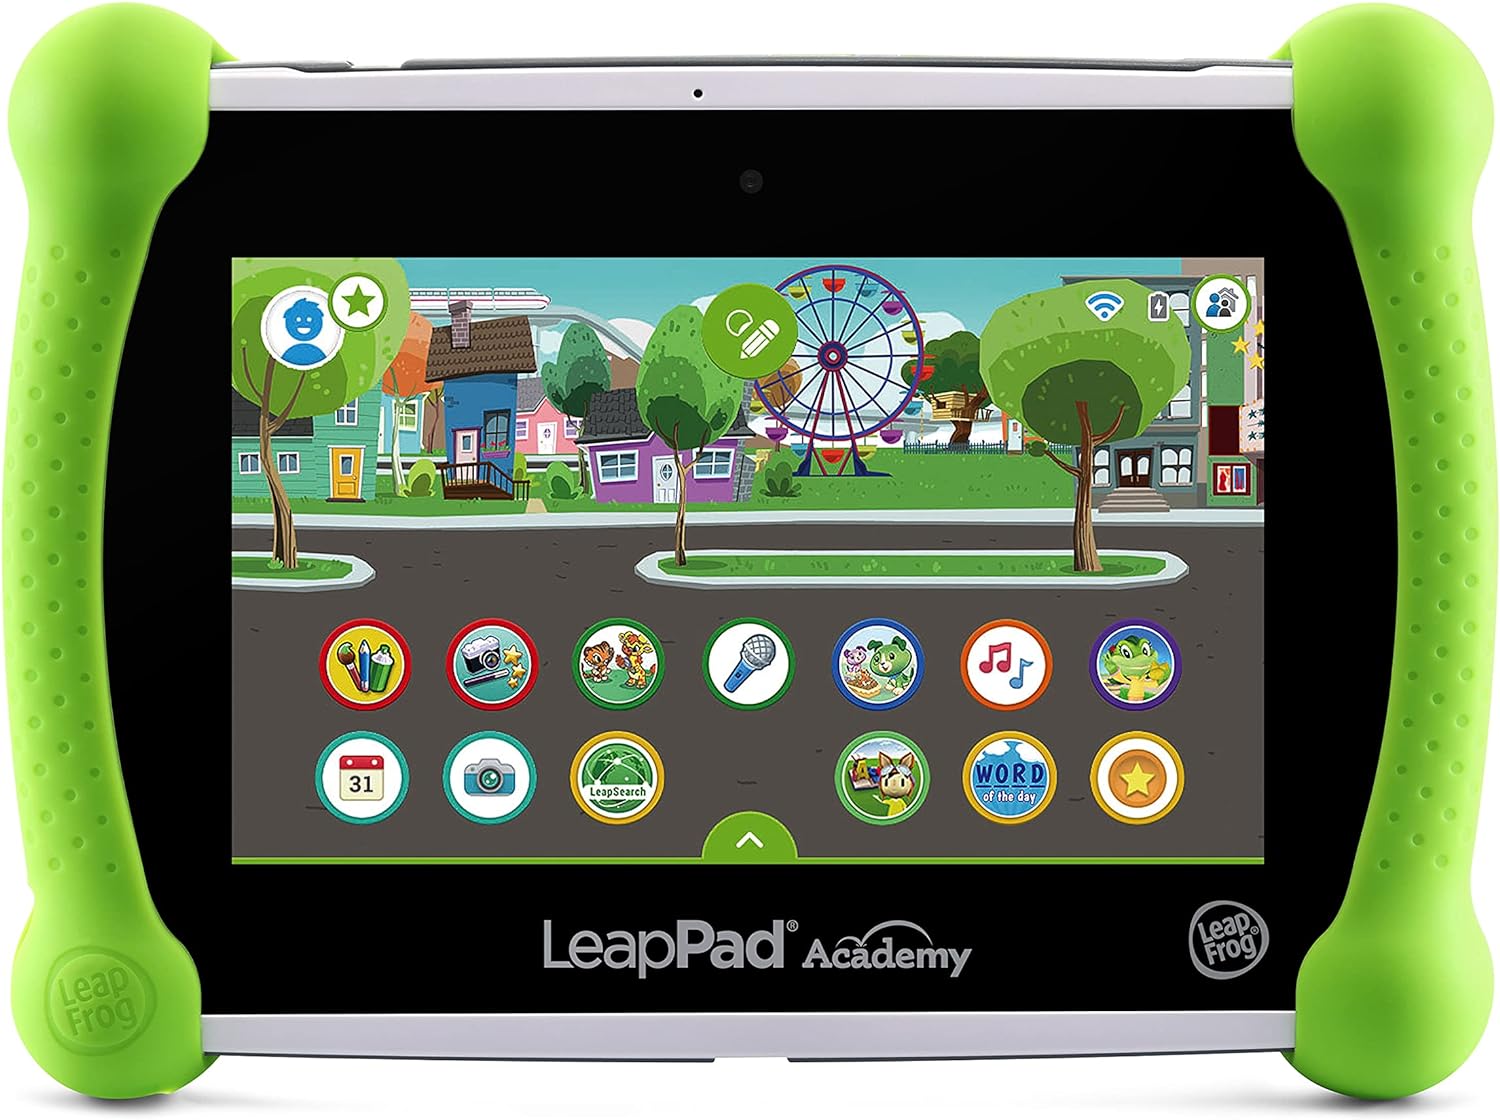 What Age Is The Leapfrog Tablet For